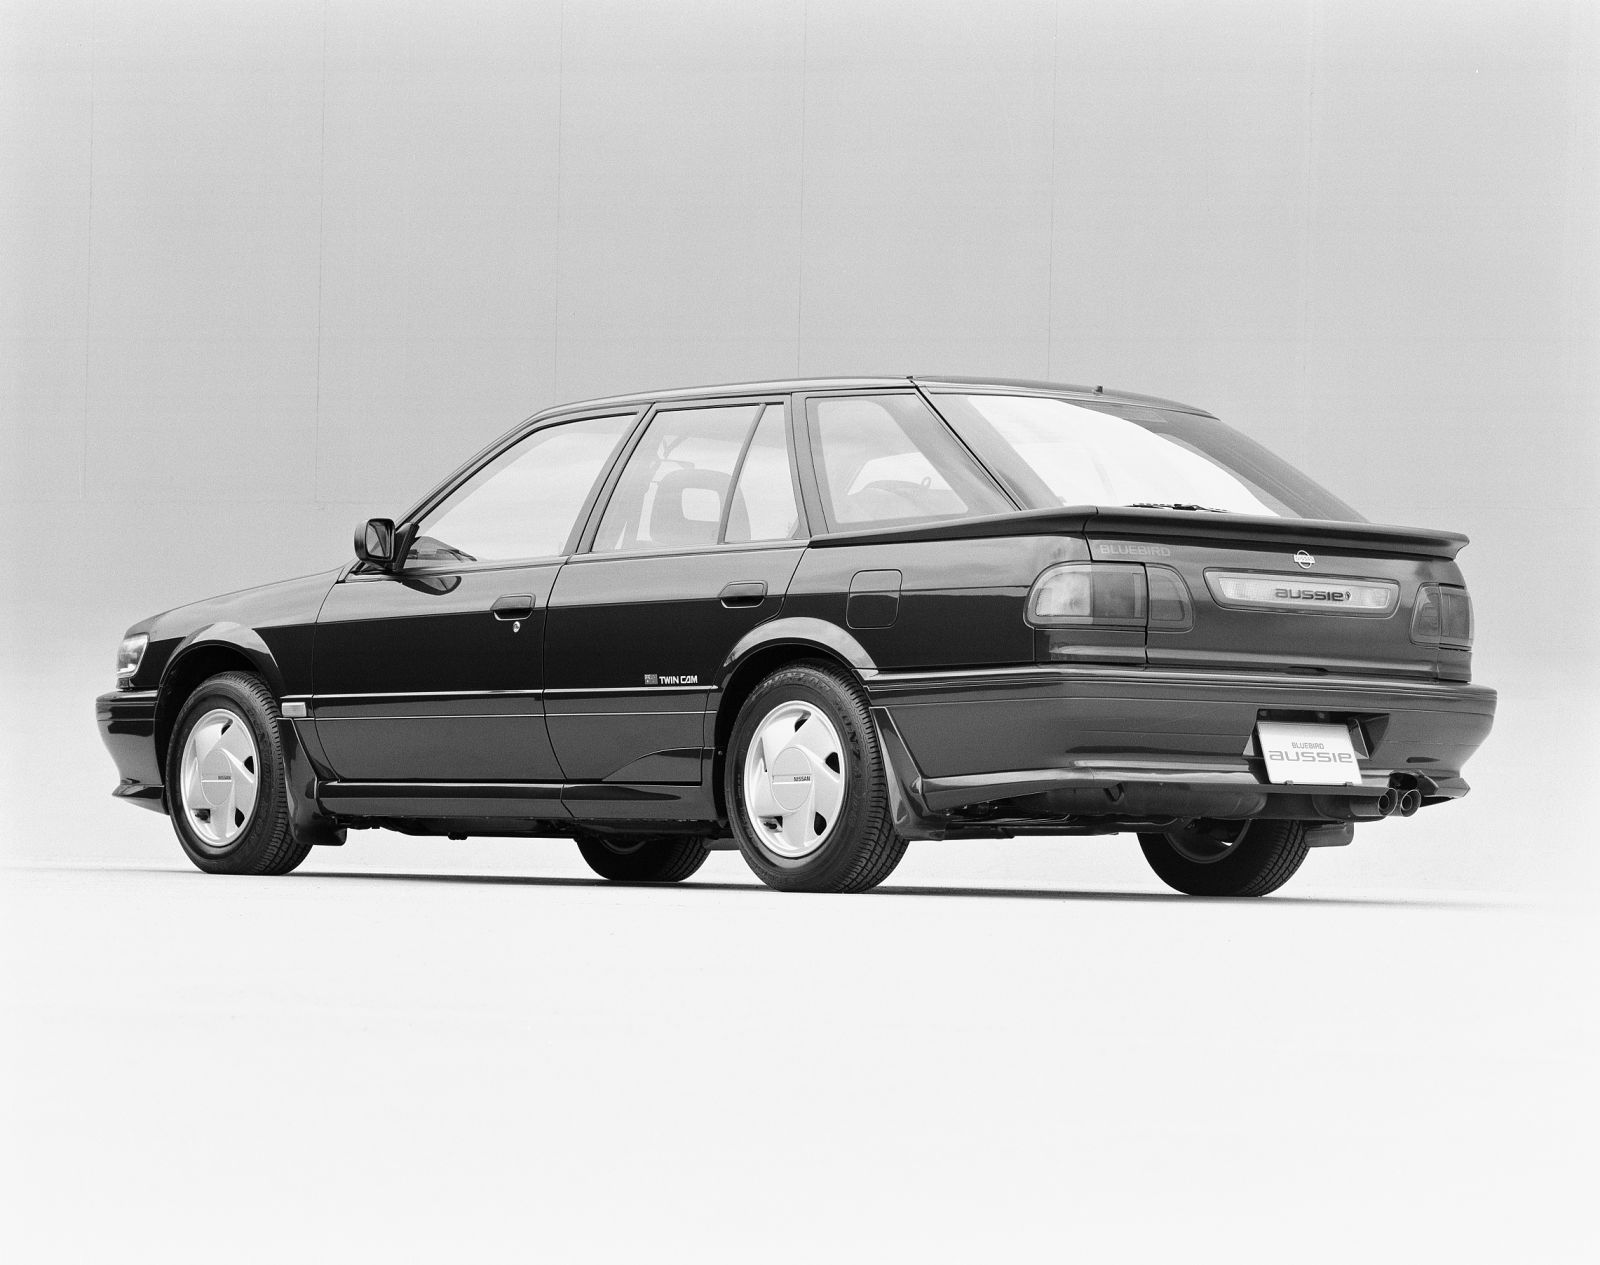 Illustration for article titled Nissan Bluebird Aussie